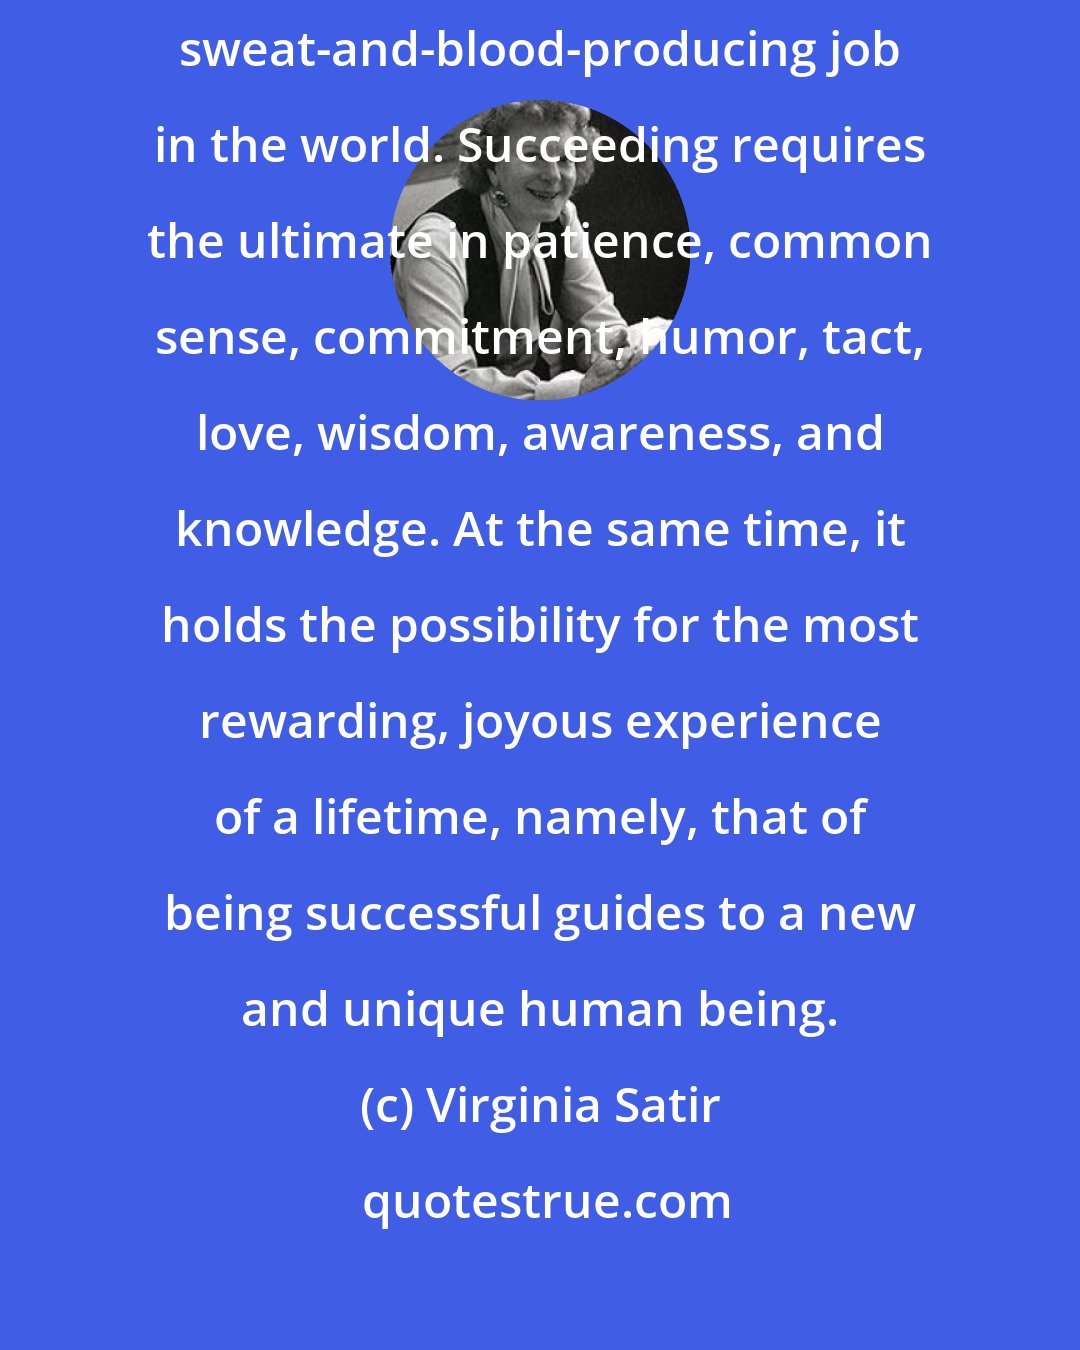 Virginia Satir: I regard (parenting) as the hardest, most complicated, anxiety-ridden, sweat-and-blood-producing job in the world. Succeeding requires the ultimate in patience, common sense, commitment, humor, tact, love, wisdom, awareness, and knowledge. At the same time, it holds the possibility for the most rewarding, joyous experience of a lifetime, namely, that of being successful guides to a new and unique human being.